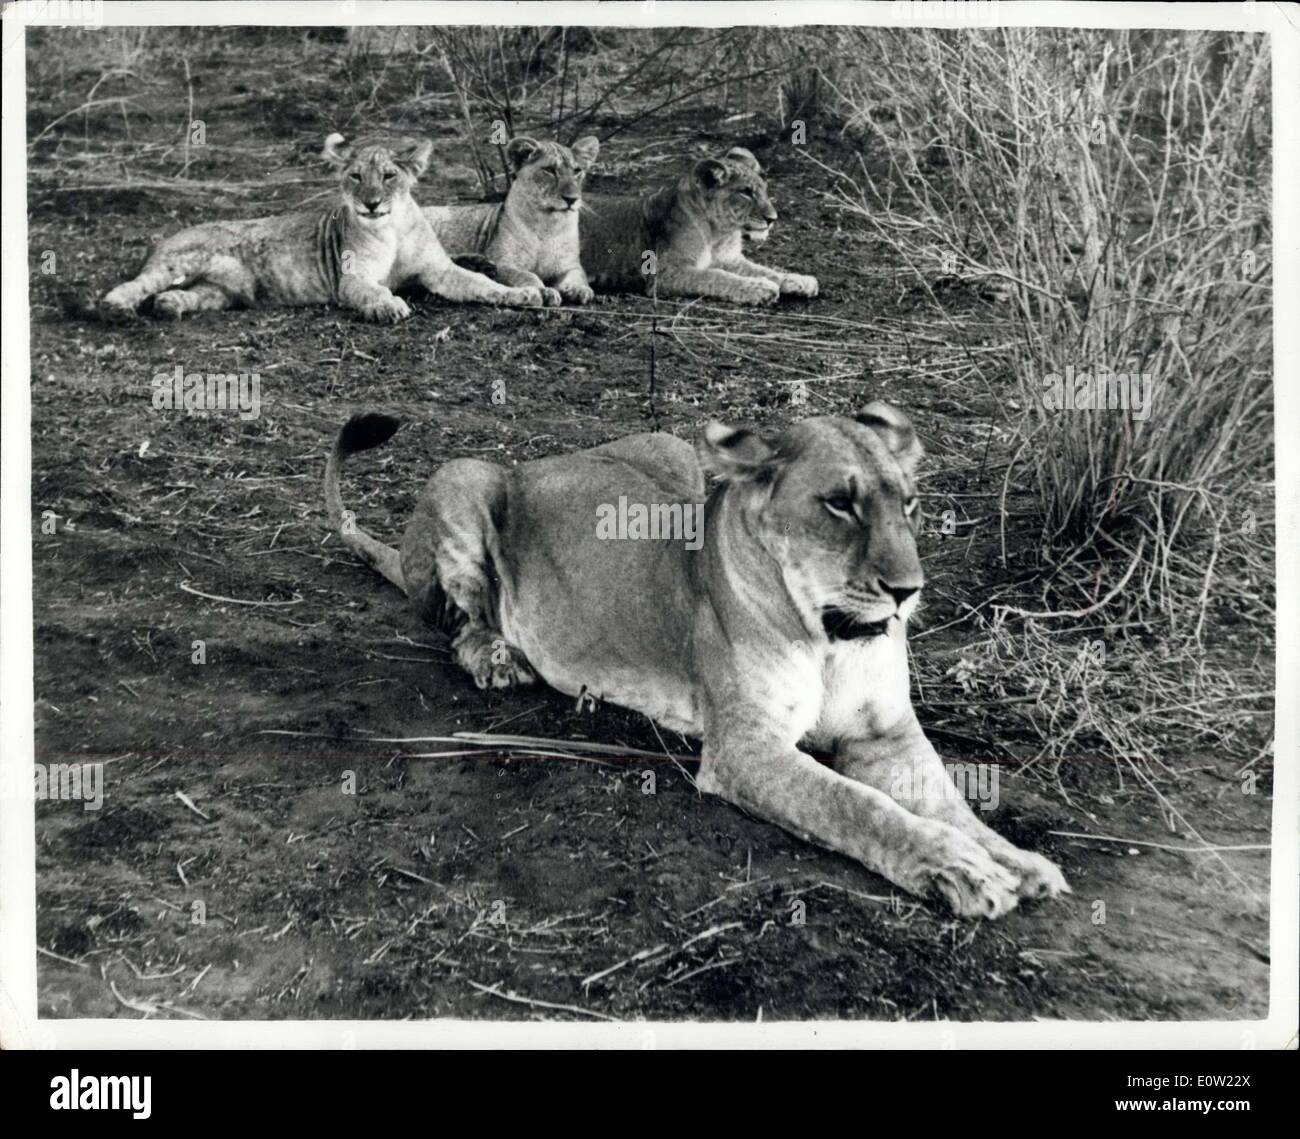 Jan. 27, 1961 - ''Elsa'' The Lioness Banished From Her Kenya Home - Is Later Reported To Be Dead: Lioness ''Elsa'' the star of the best seller ''Born Free'' - by Joy Adamson - was reported today to have been banished from Kenya's Northern Frontier District - by the local Africa District Council which ruled that the lioness and her cubs were dangerous.. The Lioness and her cub a had been reared from birth by Joy Adamson and her husband George - who is senior Game Warden in Kenya. They have grown up in complete Adamson's country home in the Kenya Bush country Stock Photo